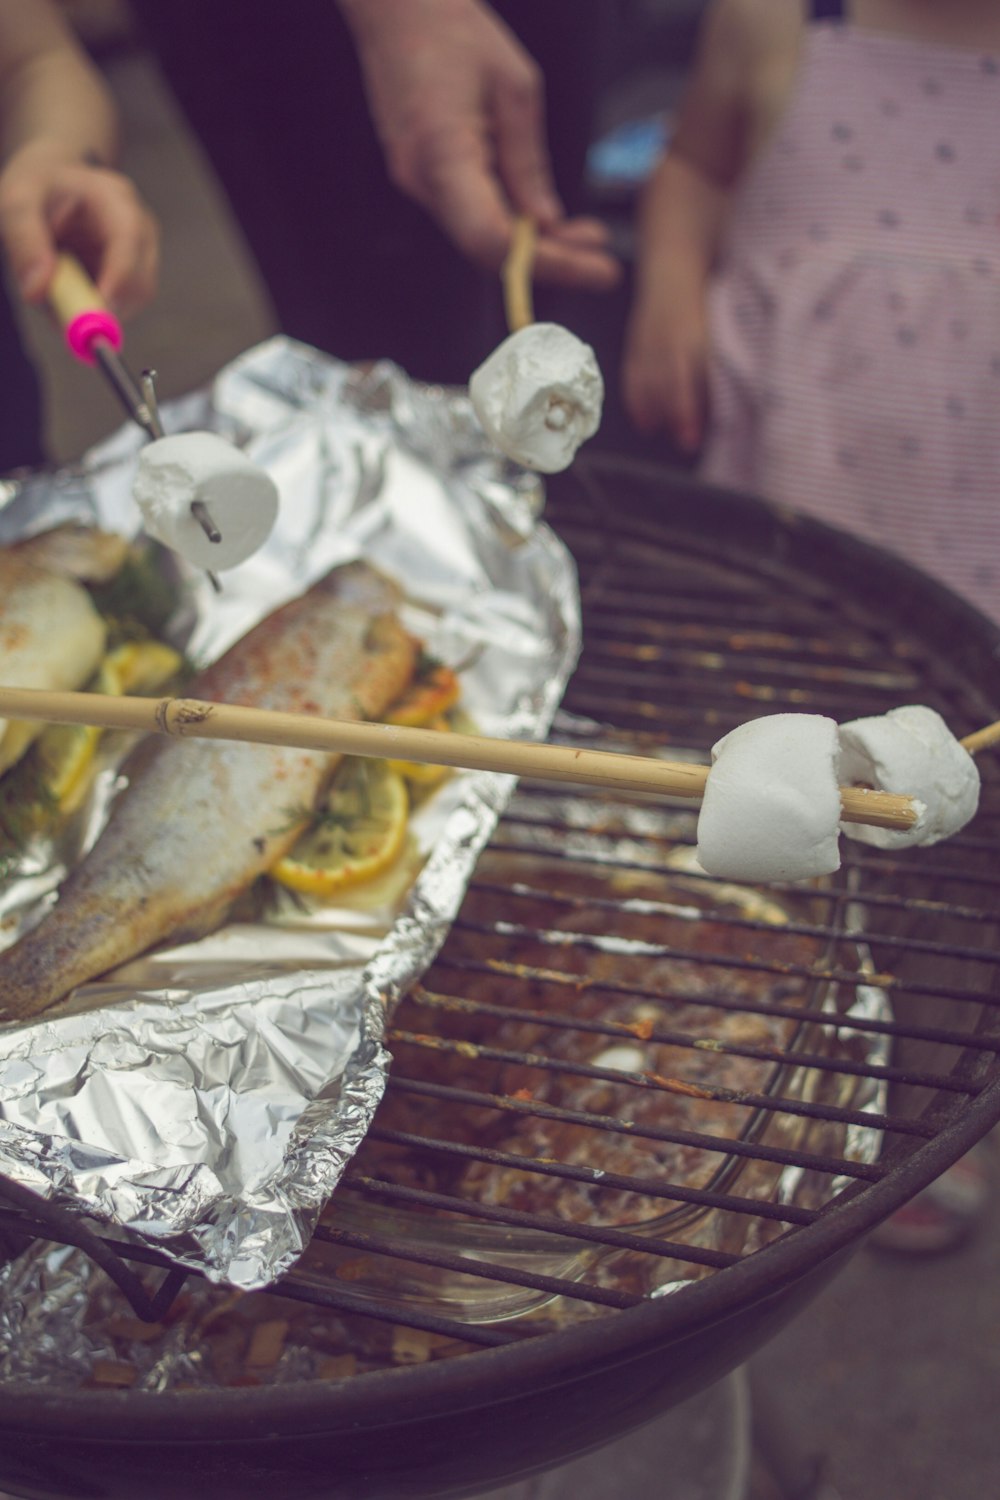 marshmallow and grilled fish